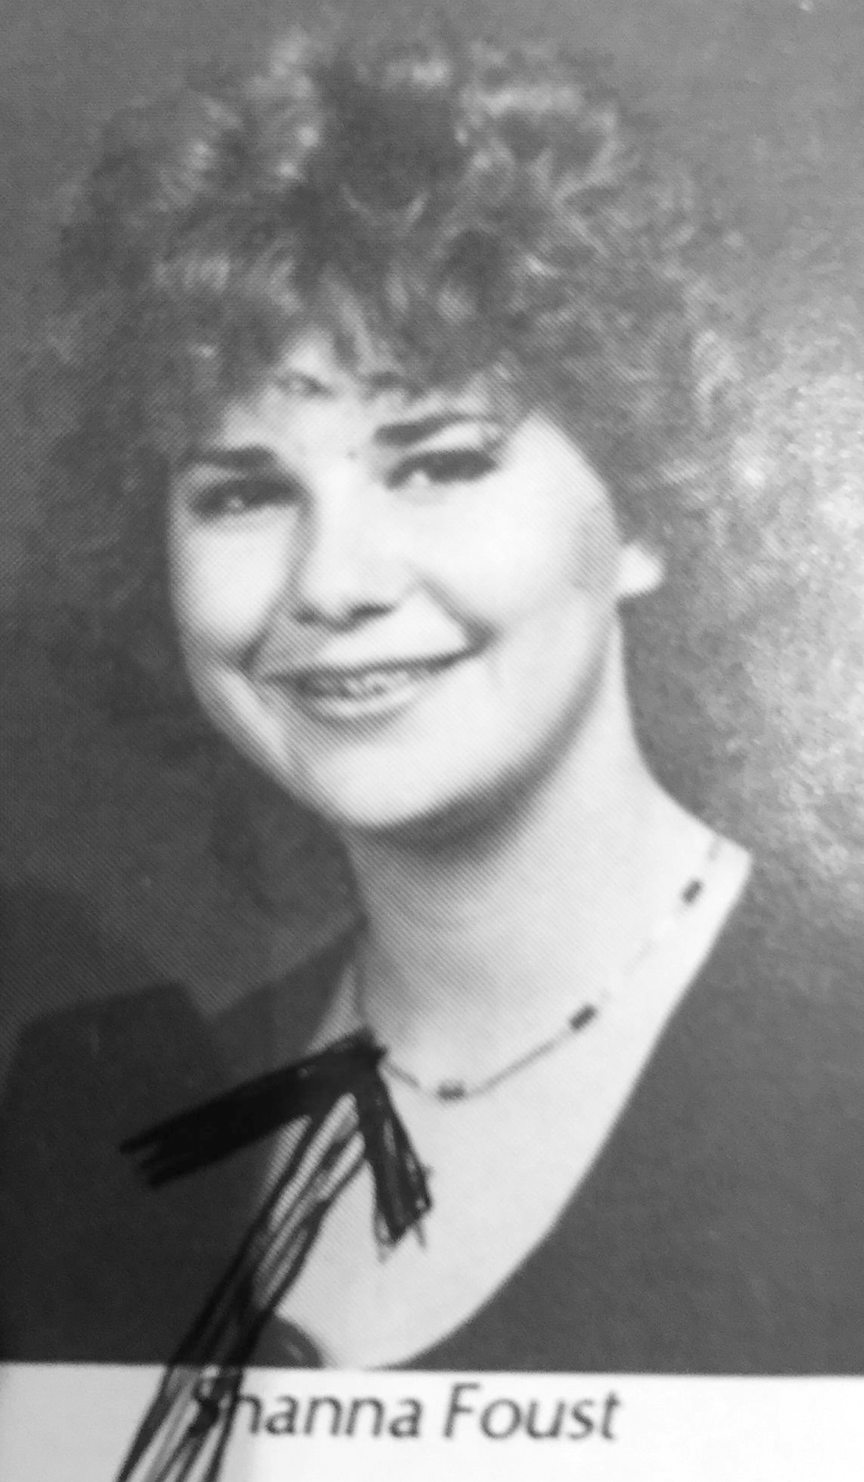 A yearbook portrait of Shanna Peeples during her senior year of high school, Borger, TX, 1983. Shanna shares, “I was attempting to rock the home perm my Meemaw assured me makes me look like a lady.” Photo courtesy of Shanna Peeples.